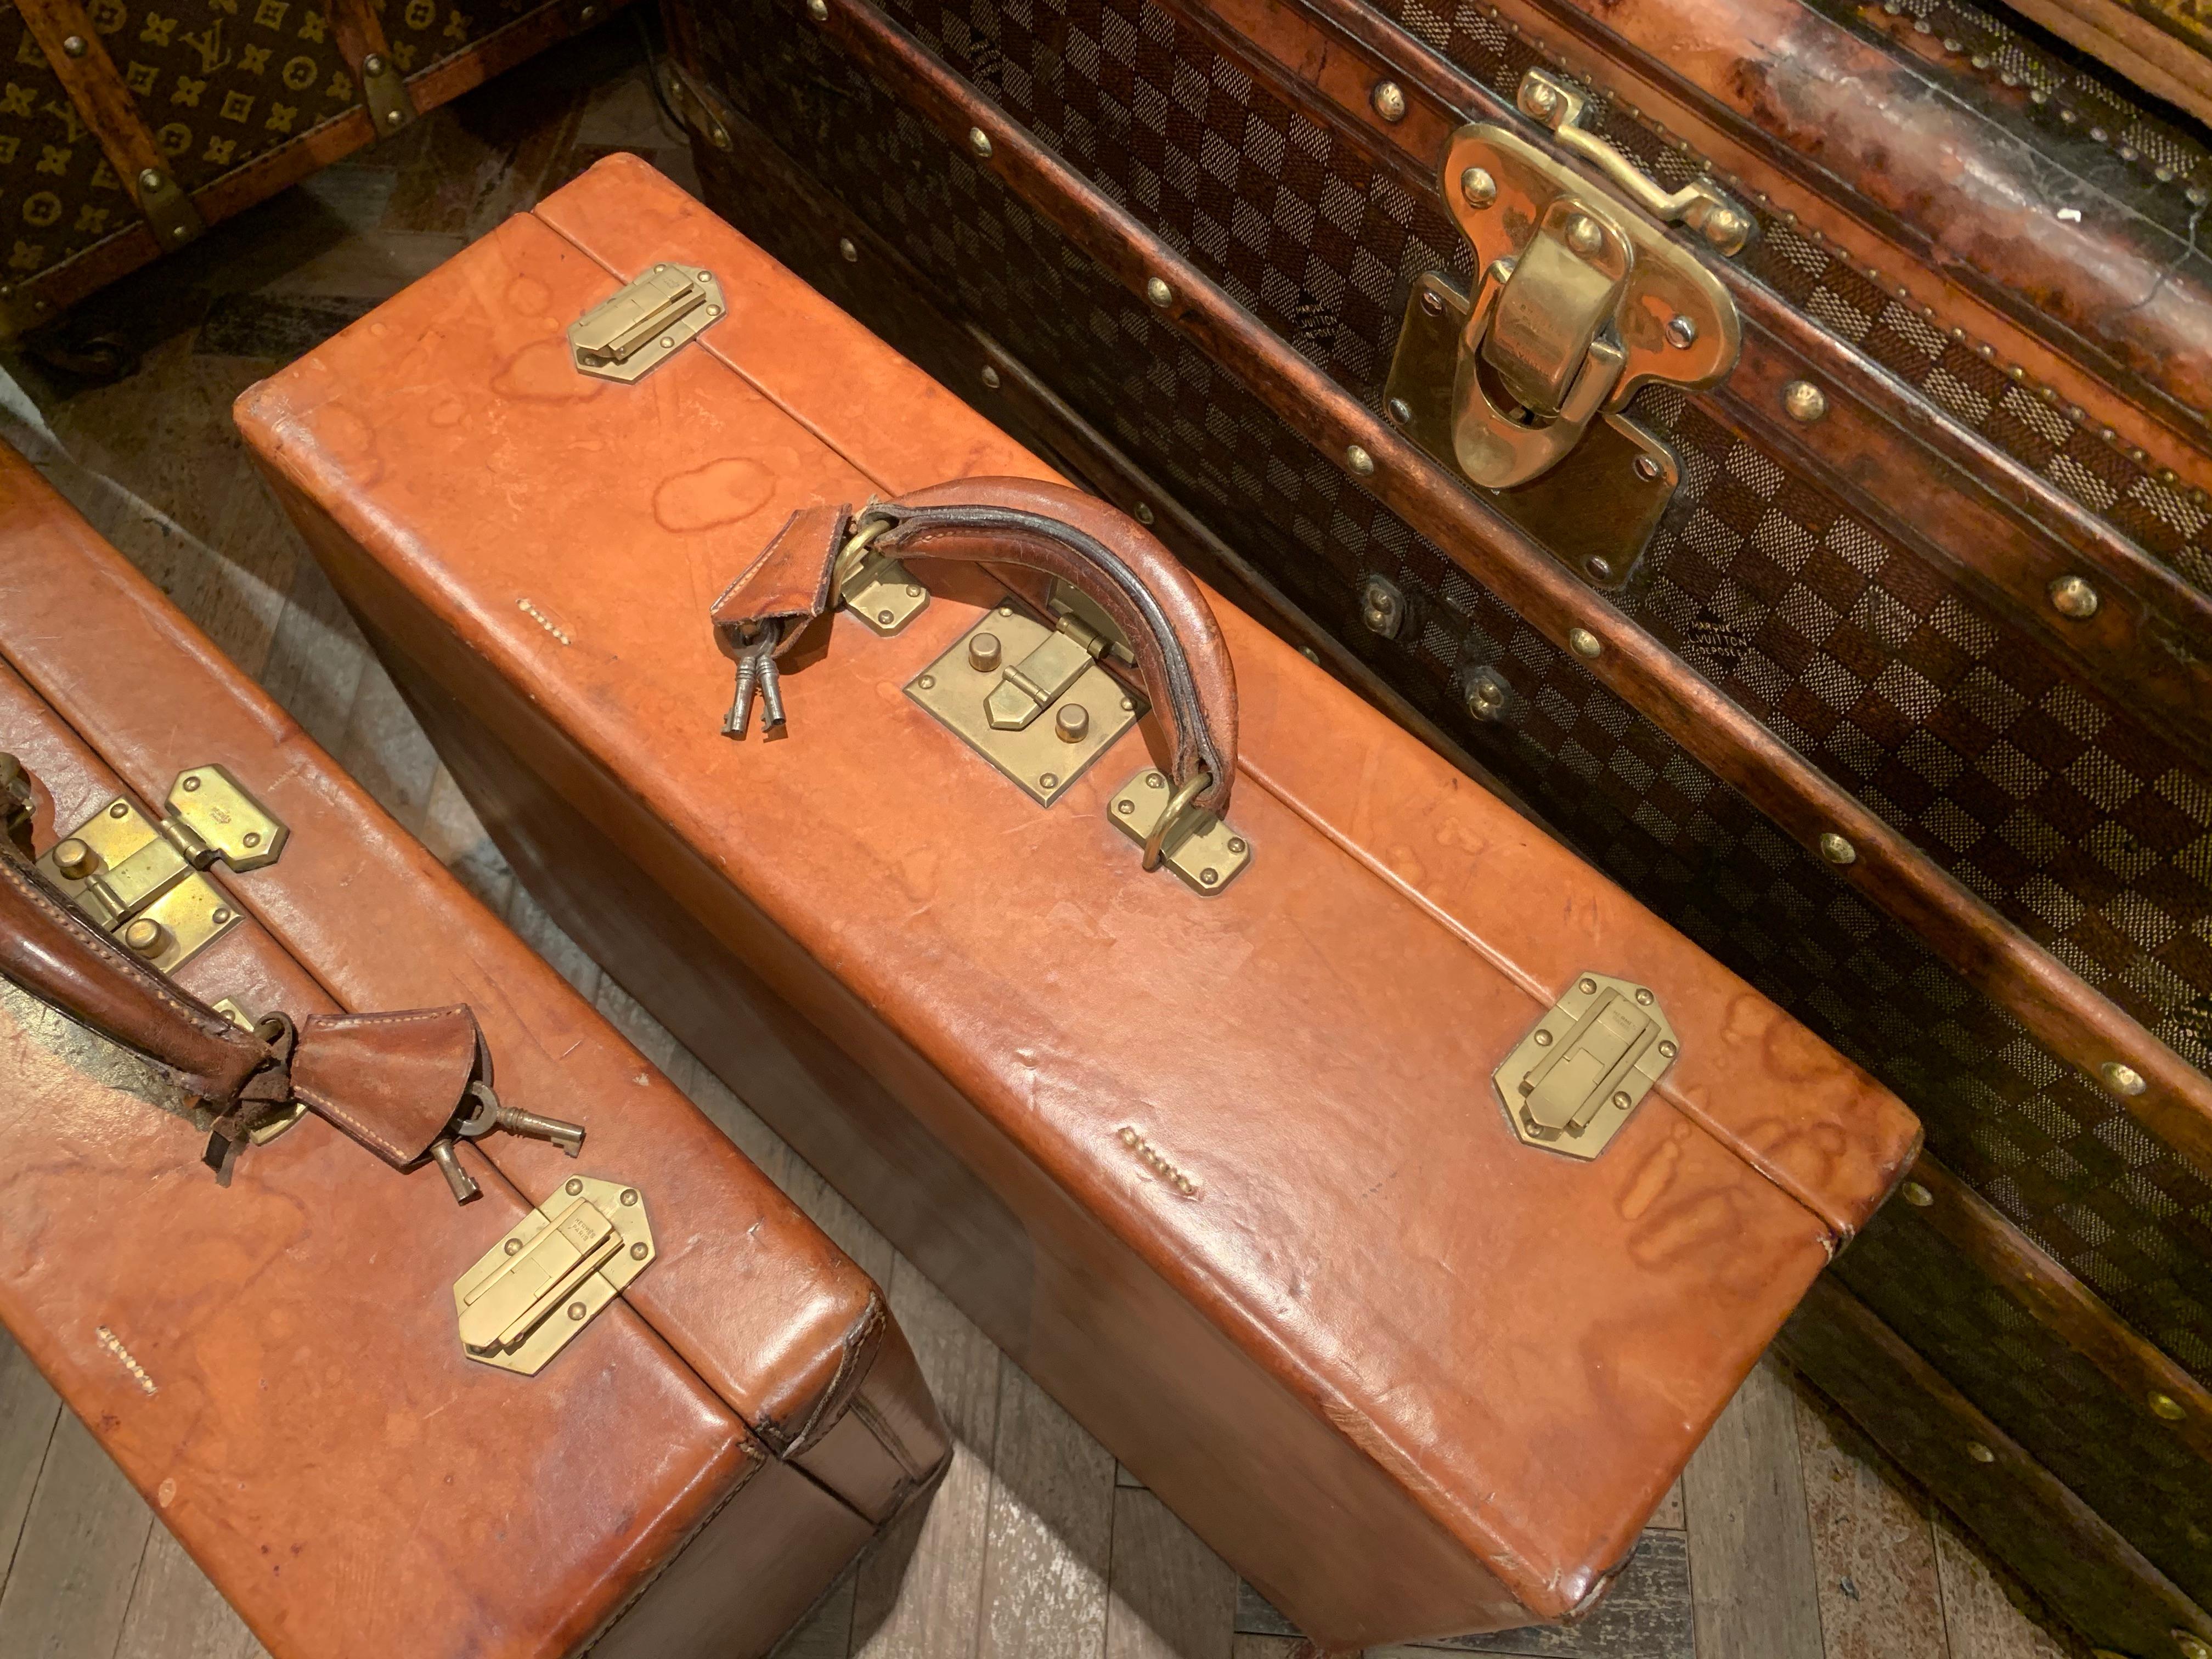 Two very rare Hermès suitcase in natural cow hide covering and brass locks and side latches, made in France, circa 1940s. 
Inside a beige fabric lining
The outside leather has some marks of wear and water stains.

Dimensions:
Small suitcase: 50